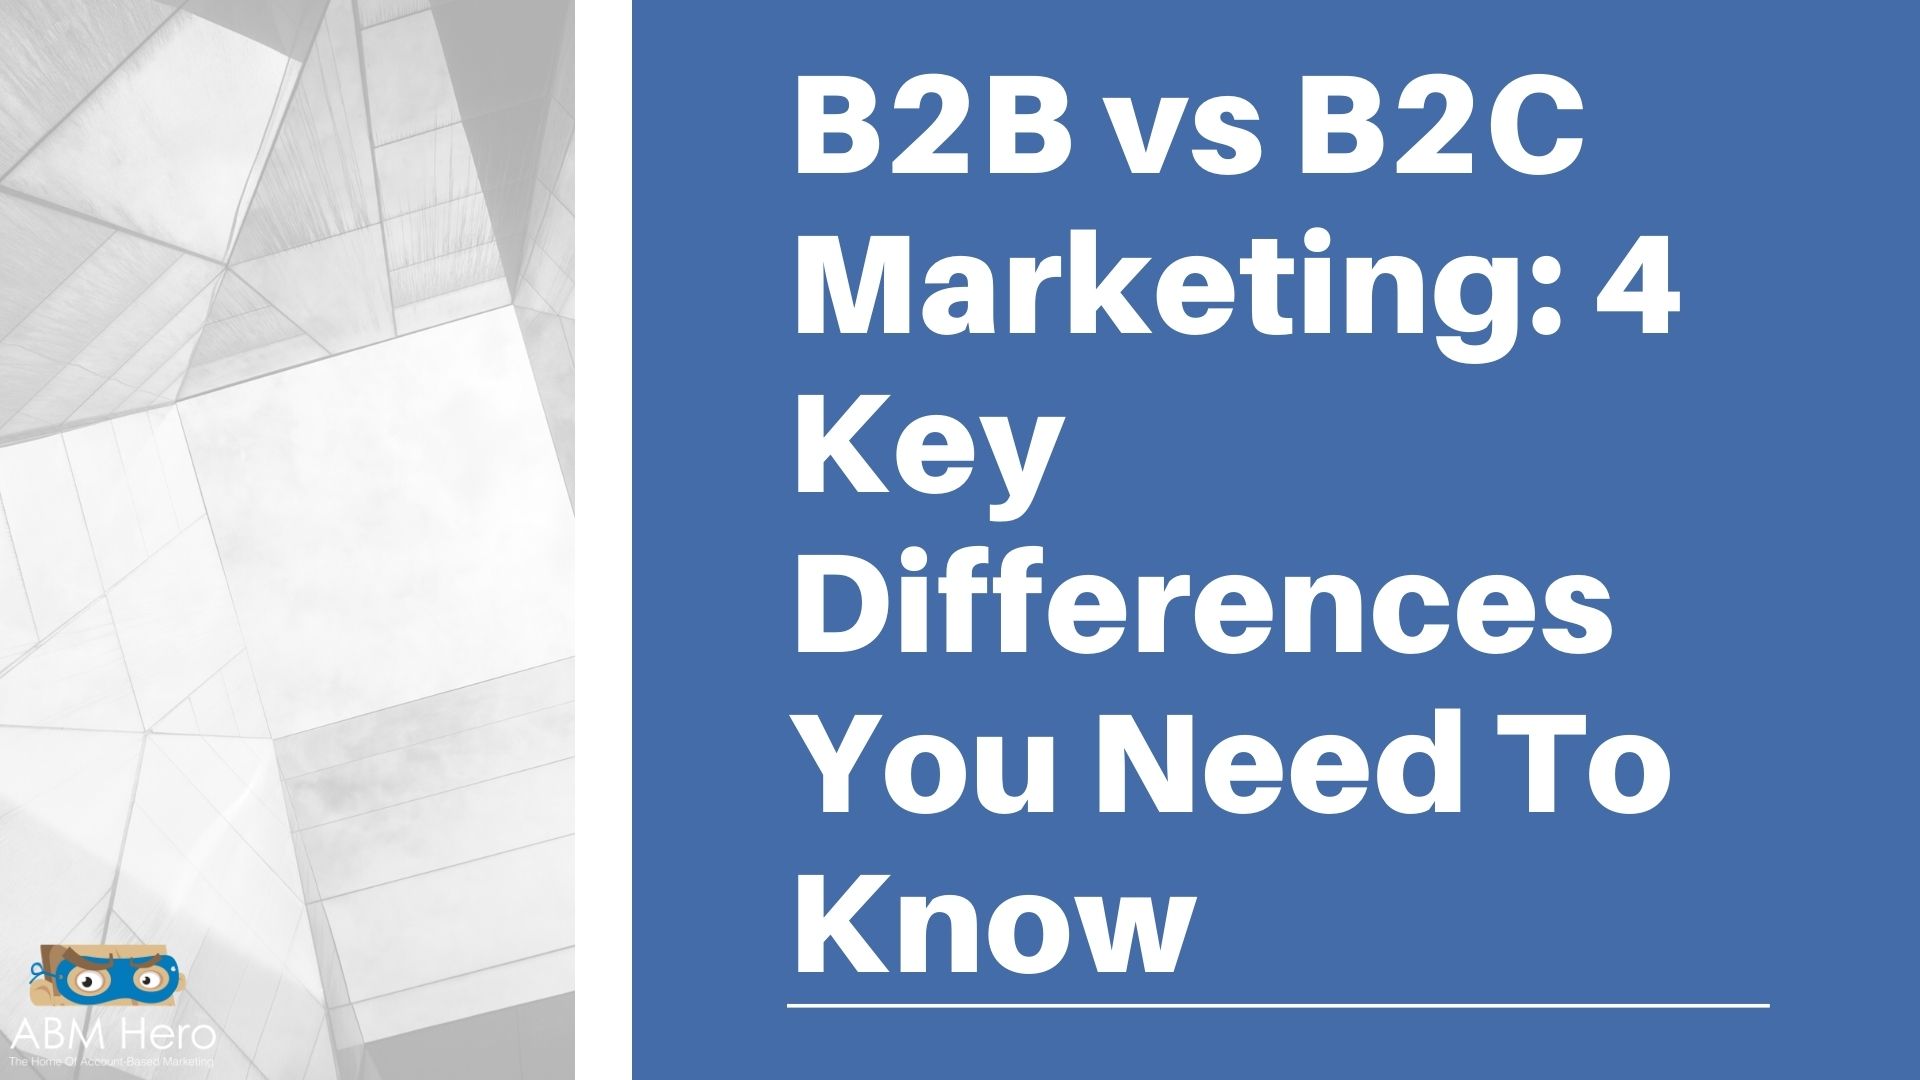 You are currently viewing B2B vs B2C Marketing: 4 Key Differences You Need To Know